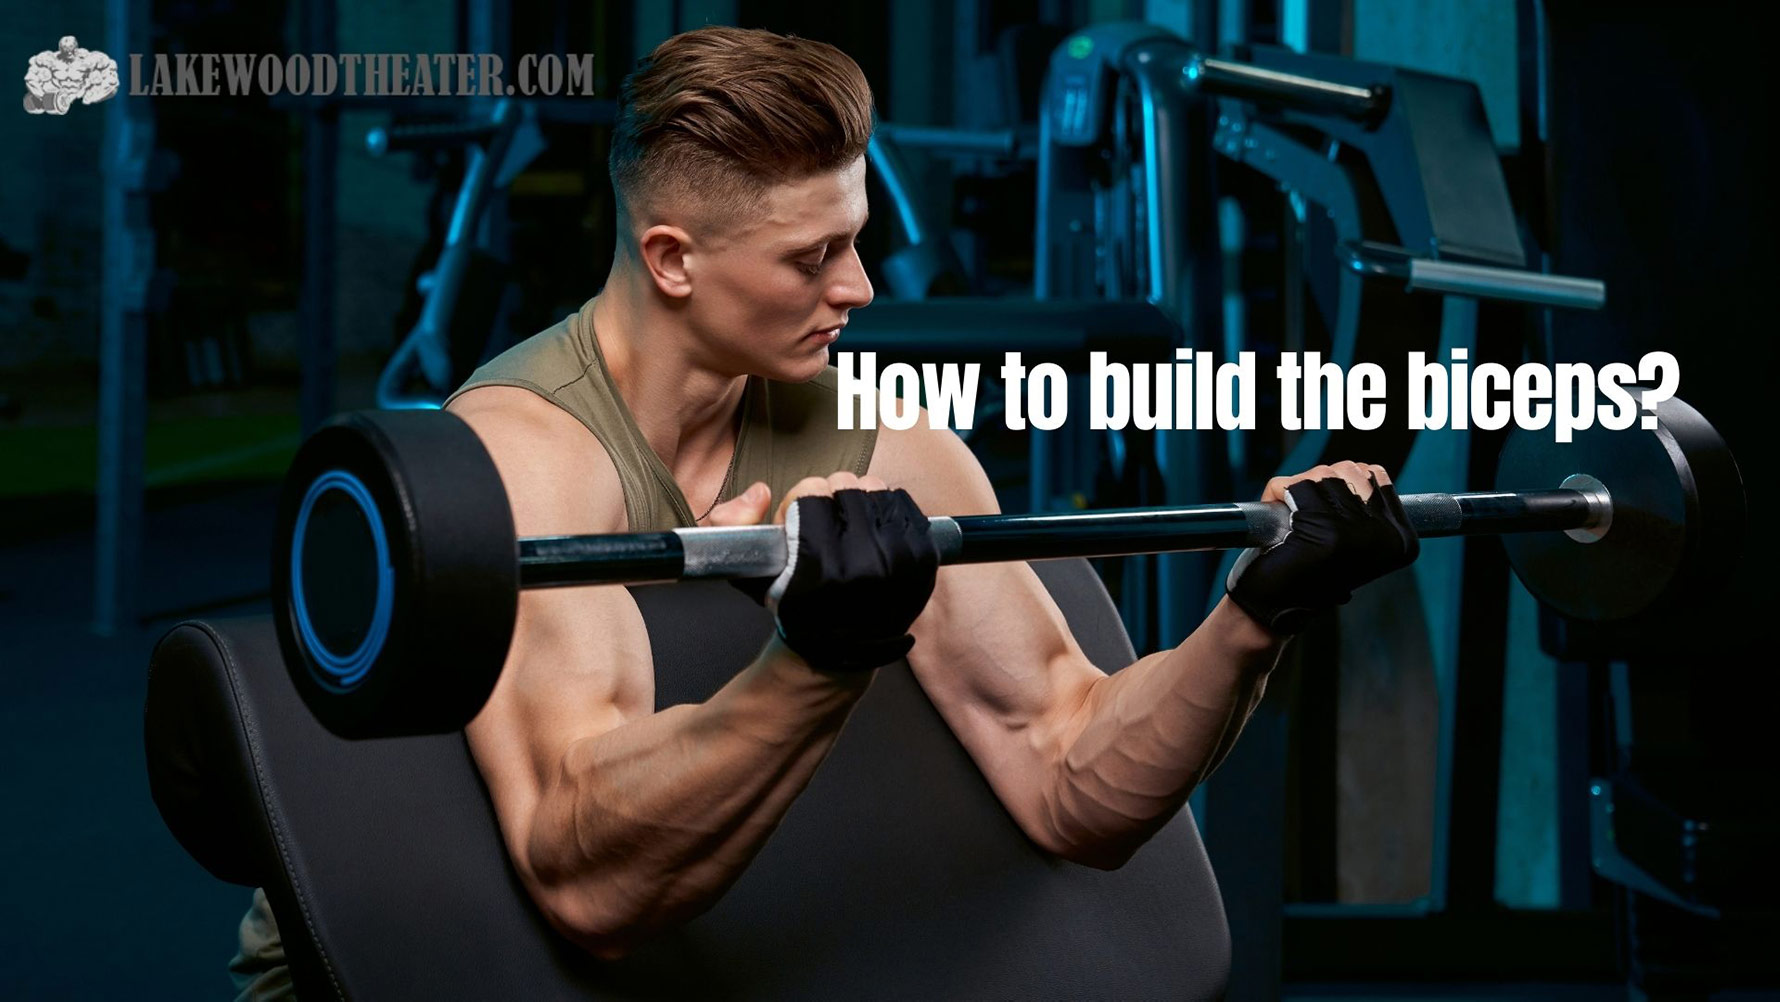 How to build the biceps?